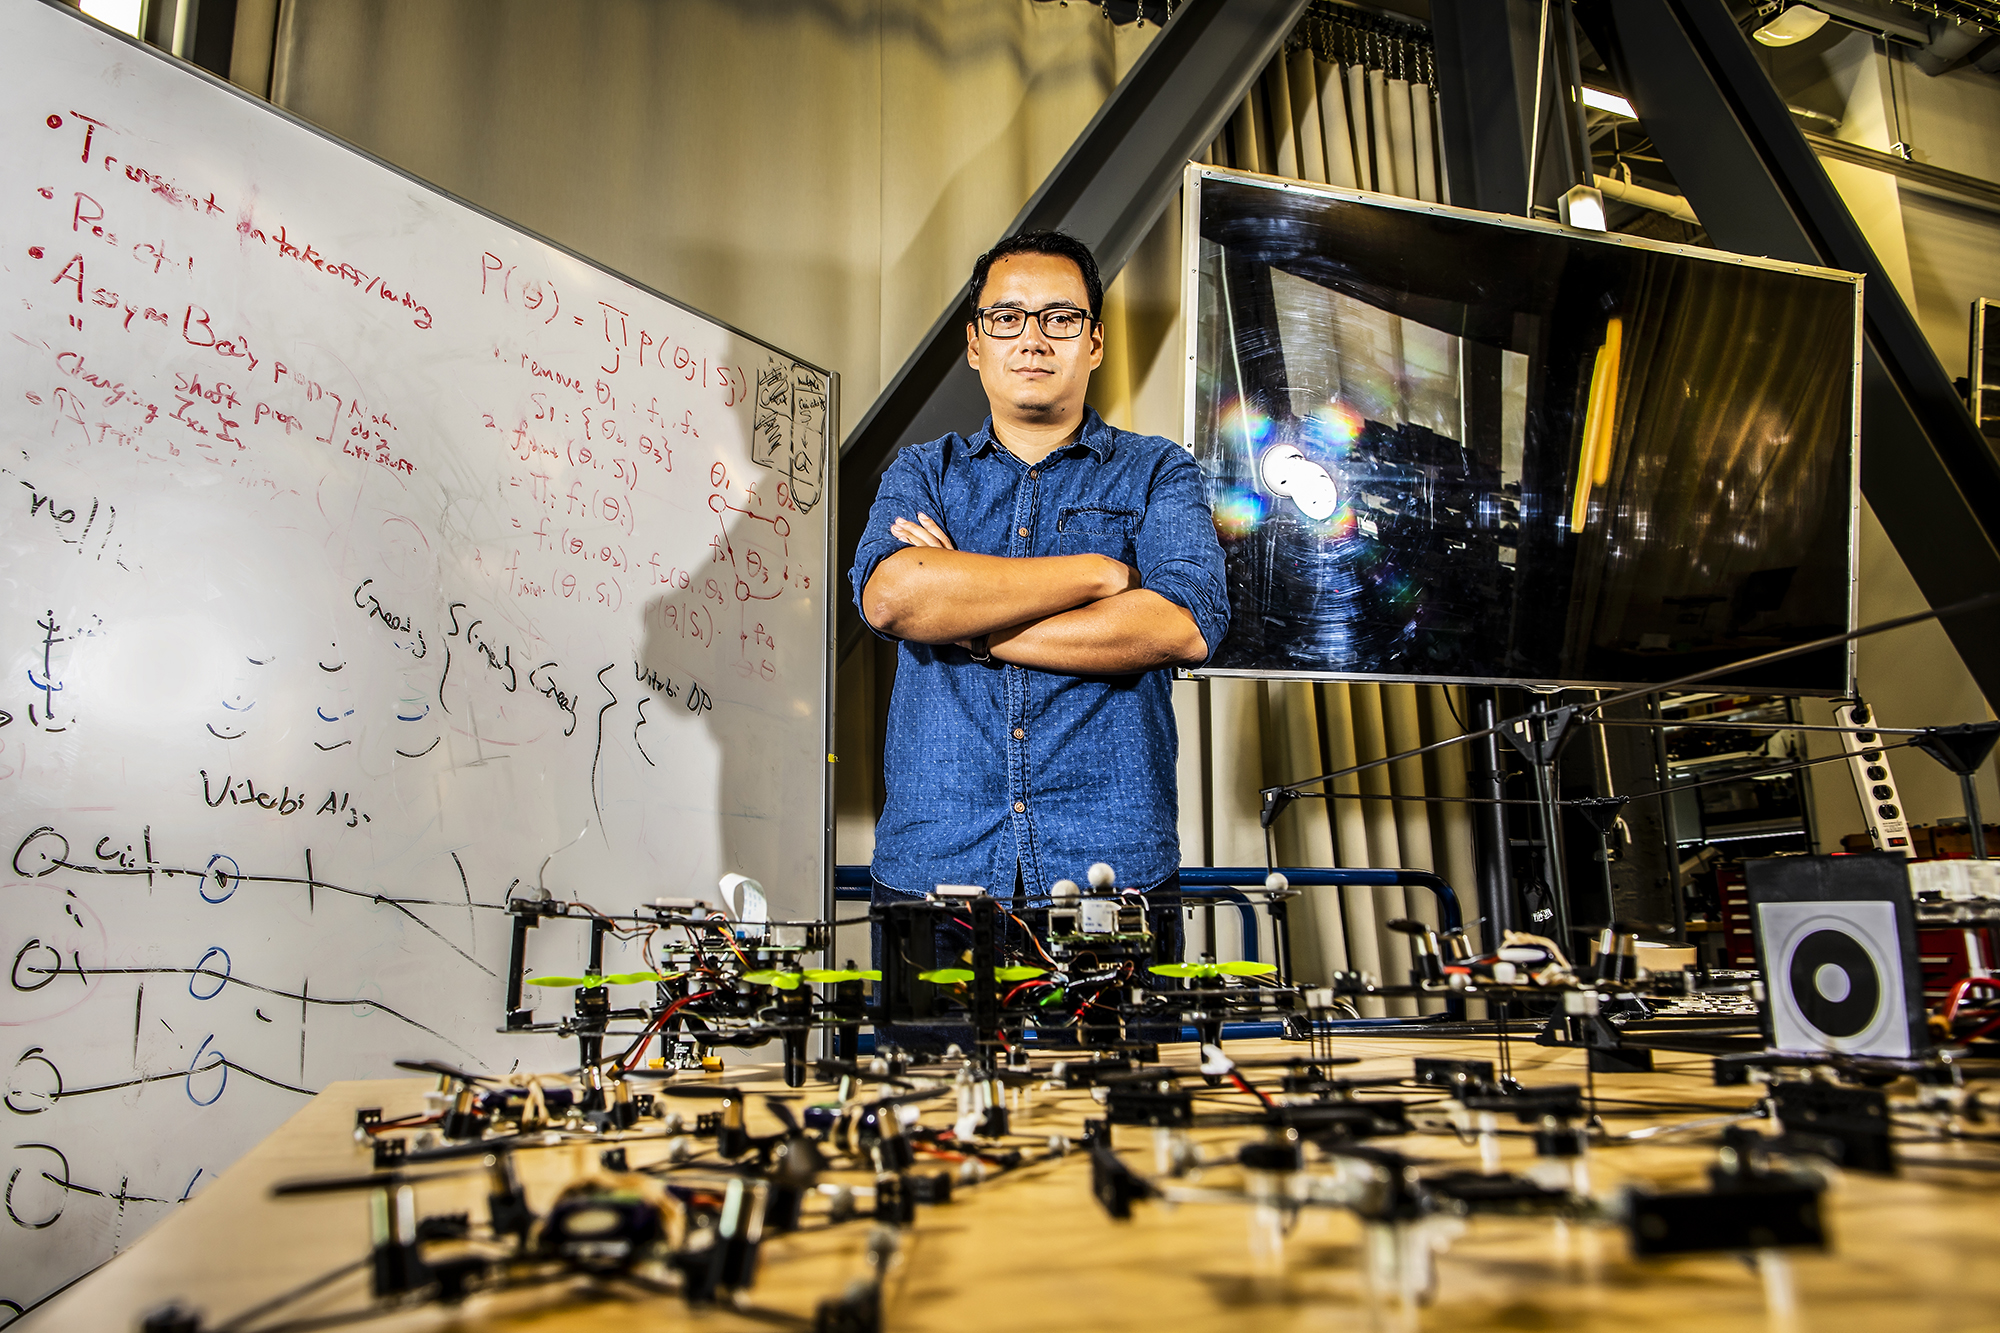 david saldana behind a table of his modular flying robots in front of a white board of equations and a TV screen